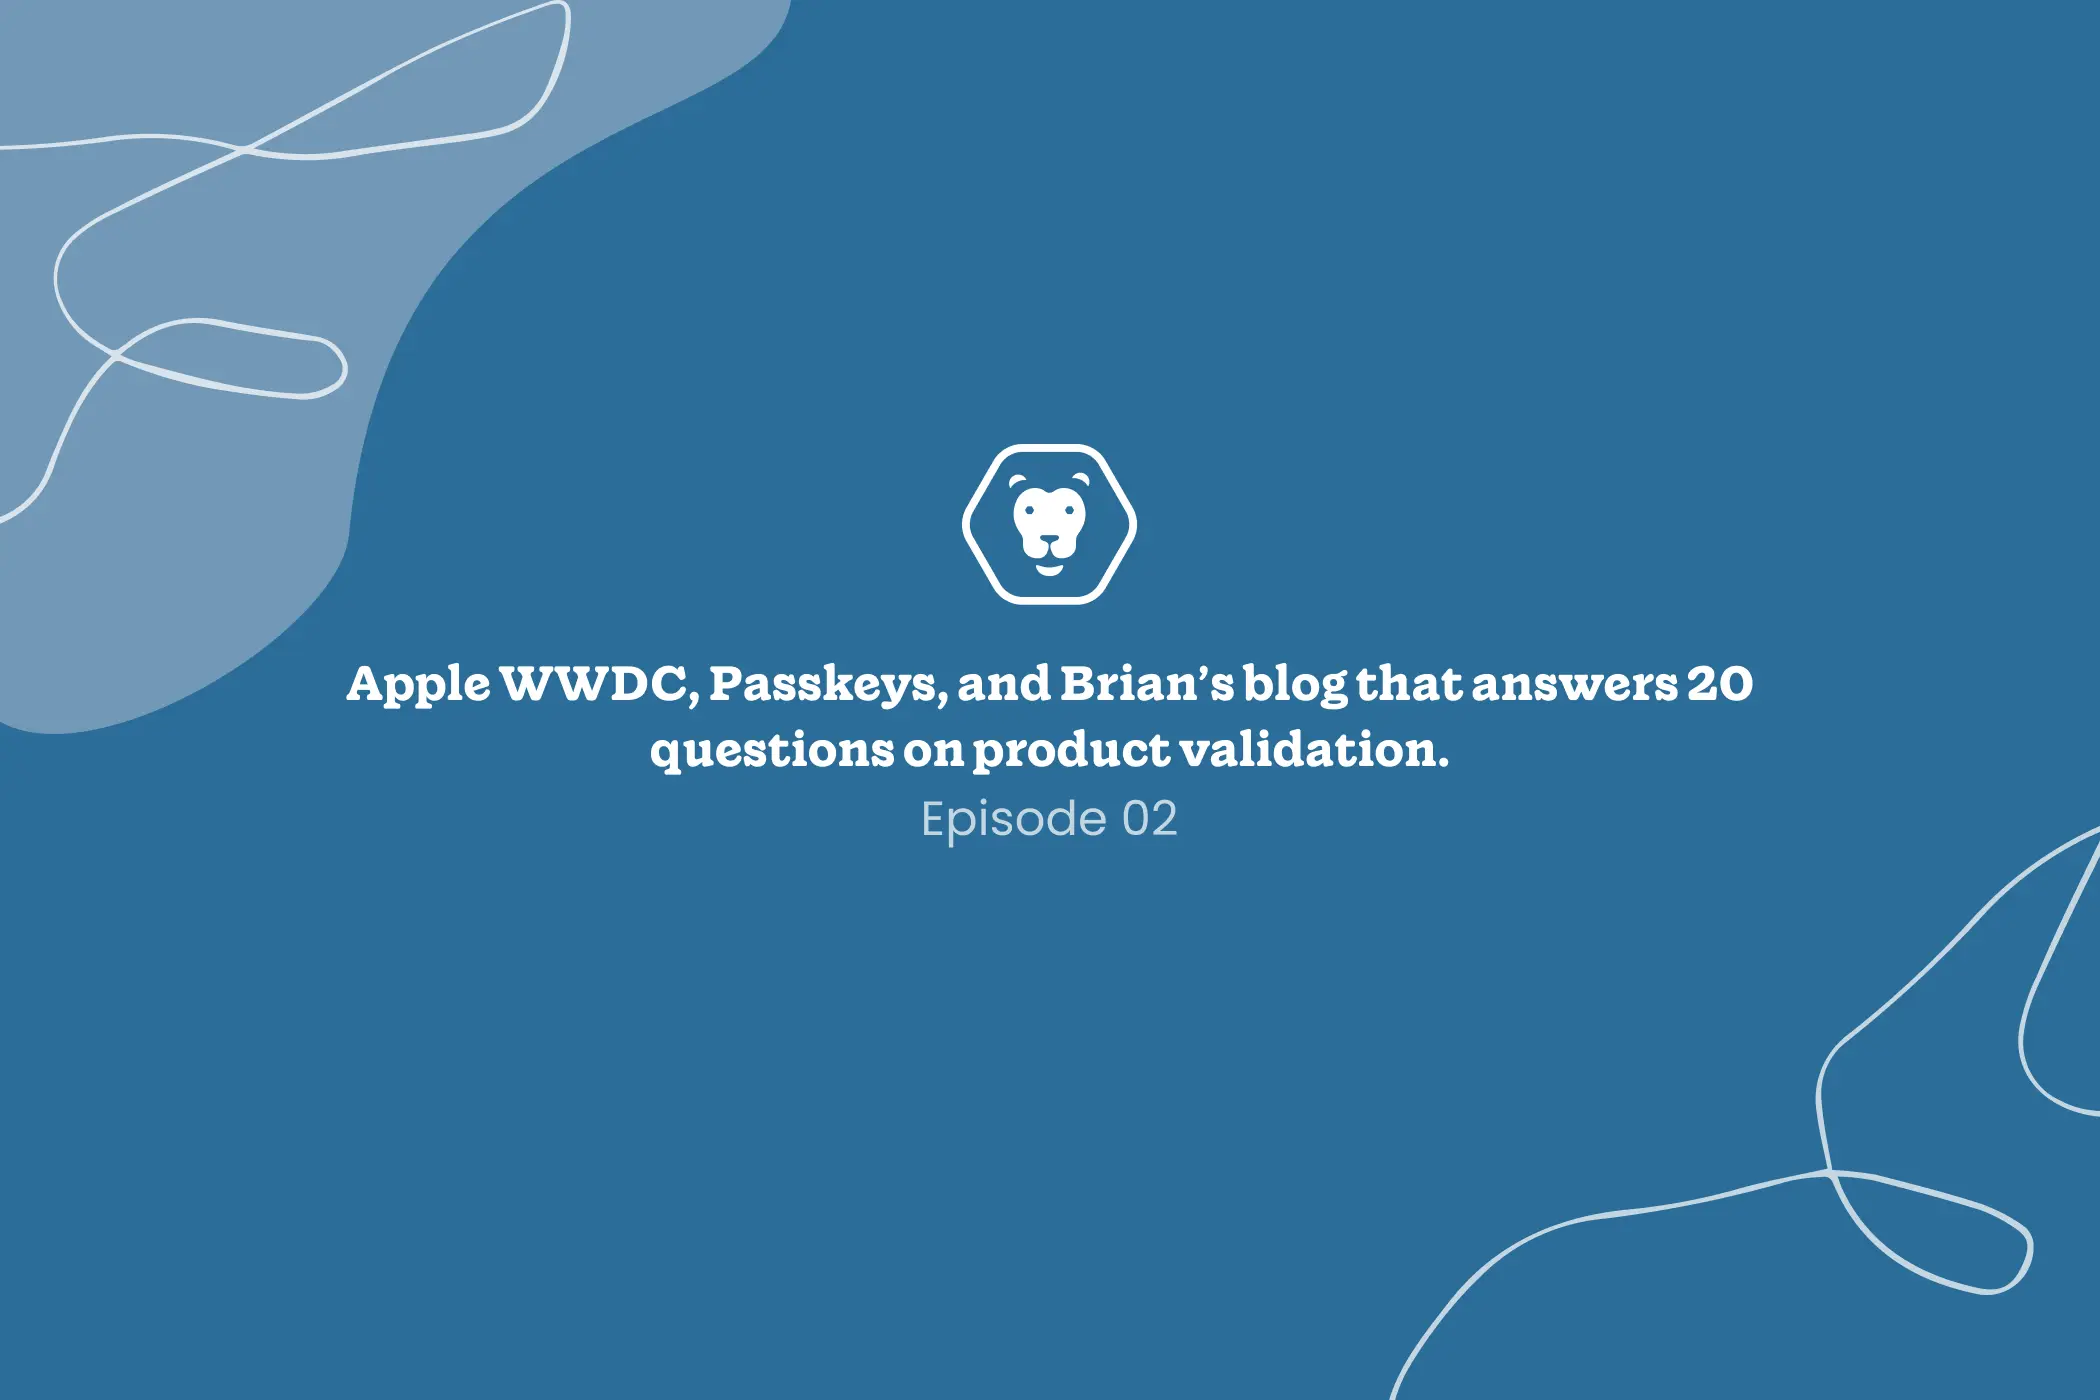 Apple WWDC, Passkeys, the PR heard ‘round the world, and Brian’s blog that answers 20 questions on product validation.